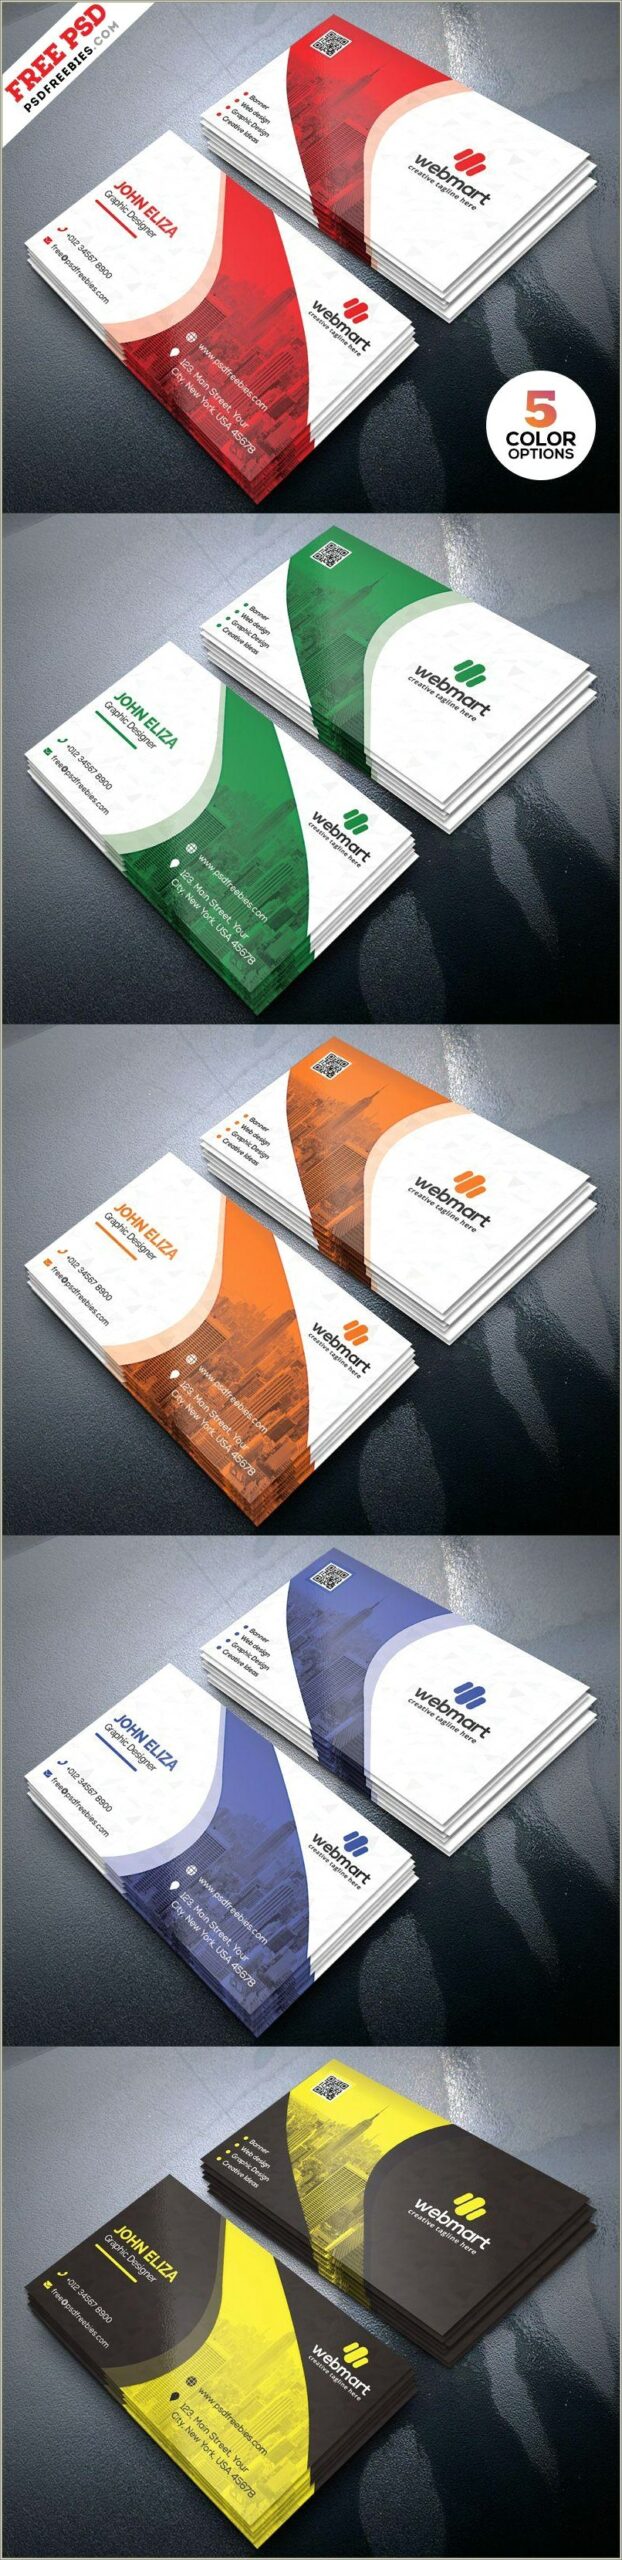 Download Free Company Business Card Psd Template